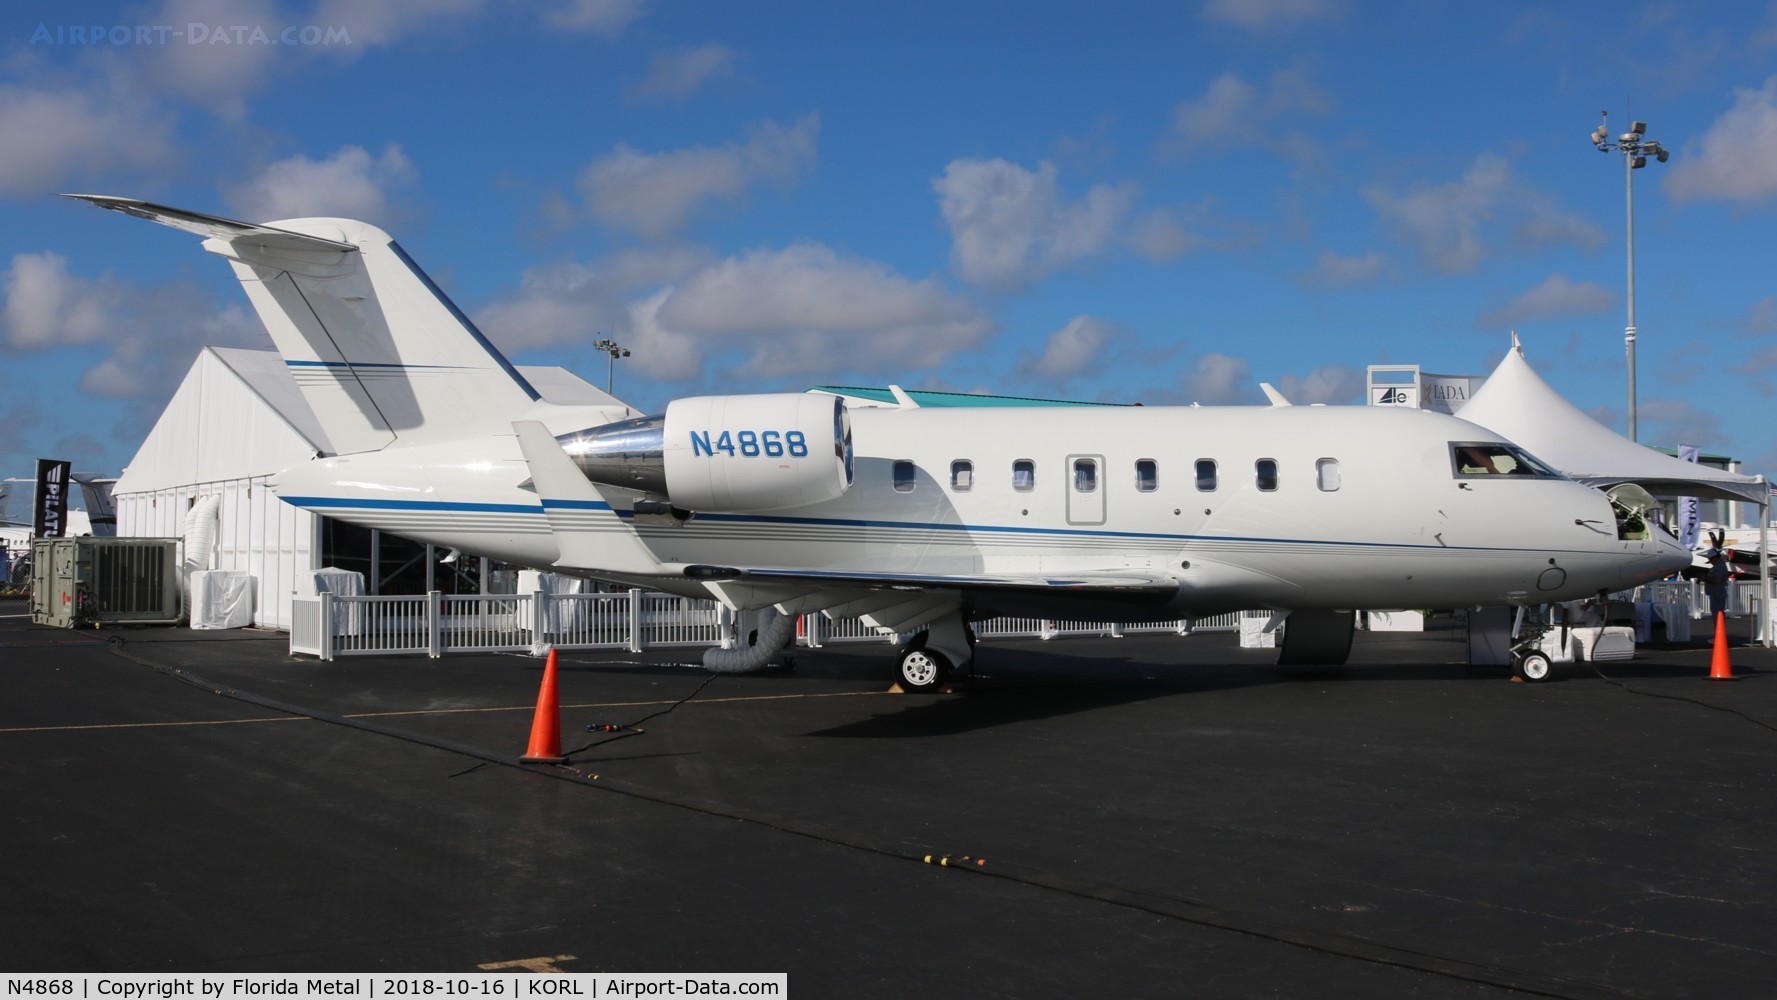 N4868, 2013 Bombardier Challenger 604 (CL-600-2B16) C/N 5492, odd that even FAA lists this as a Challenger 604, when it has the back end of a 605 and made when the 605 was being made